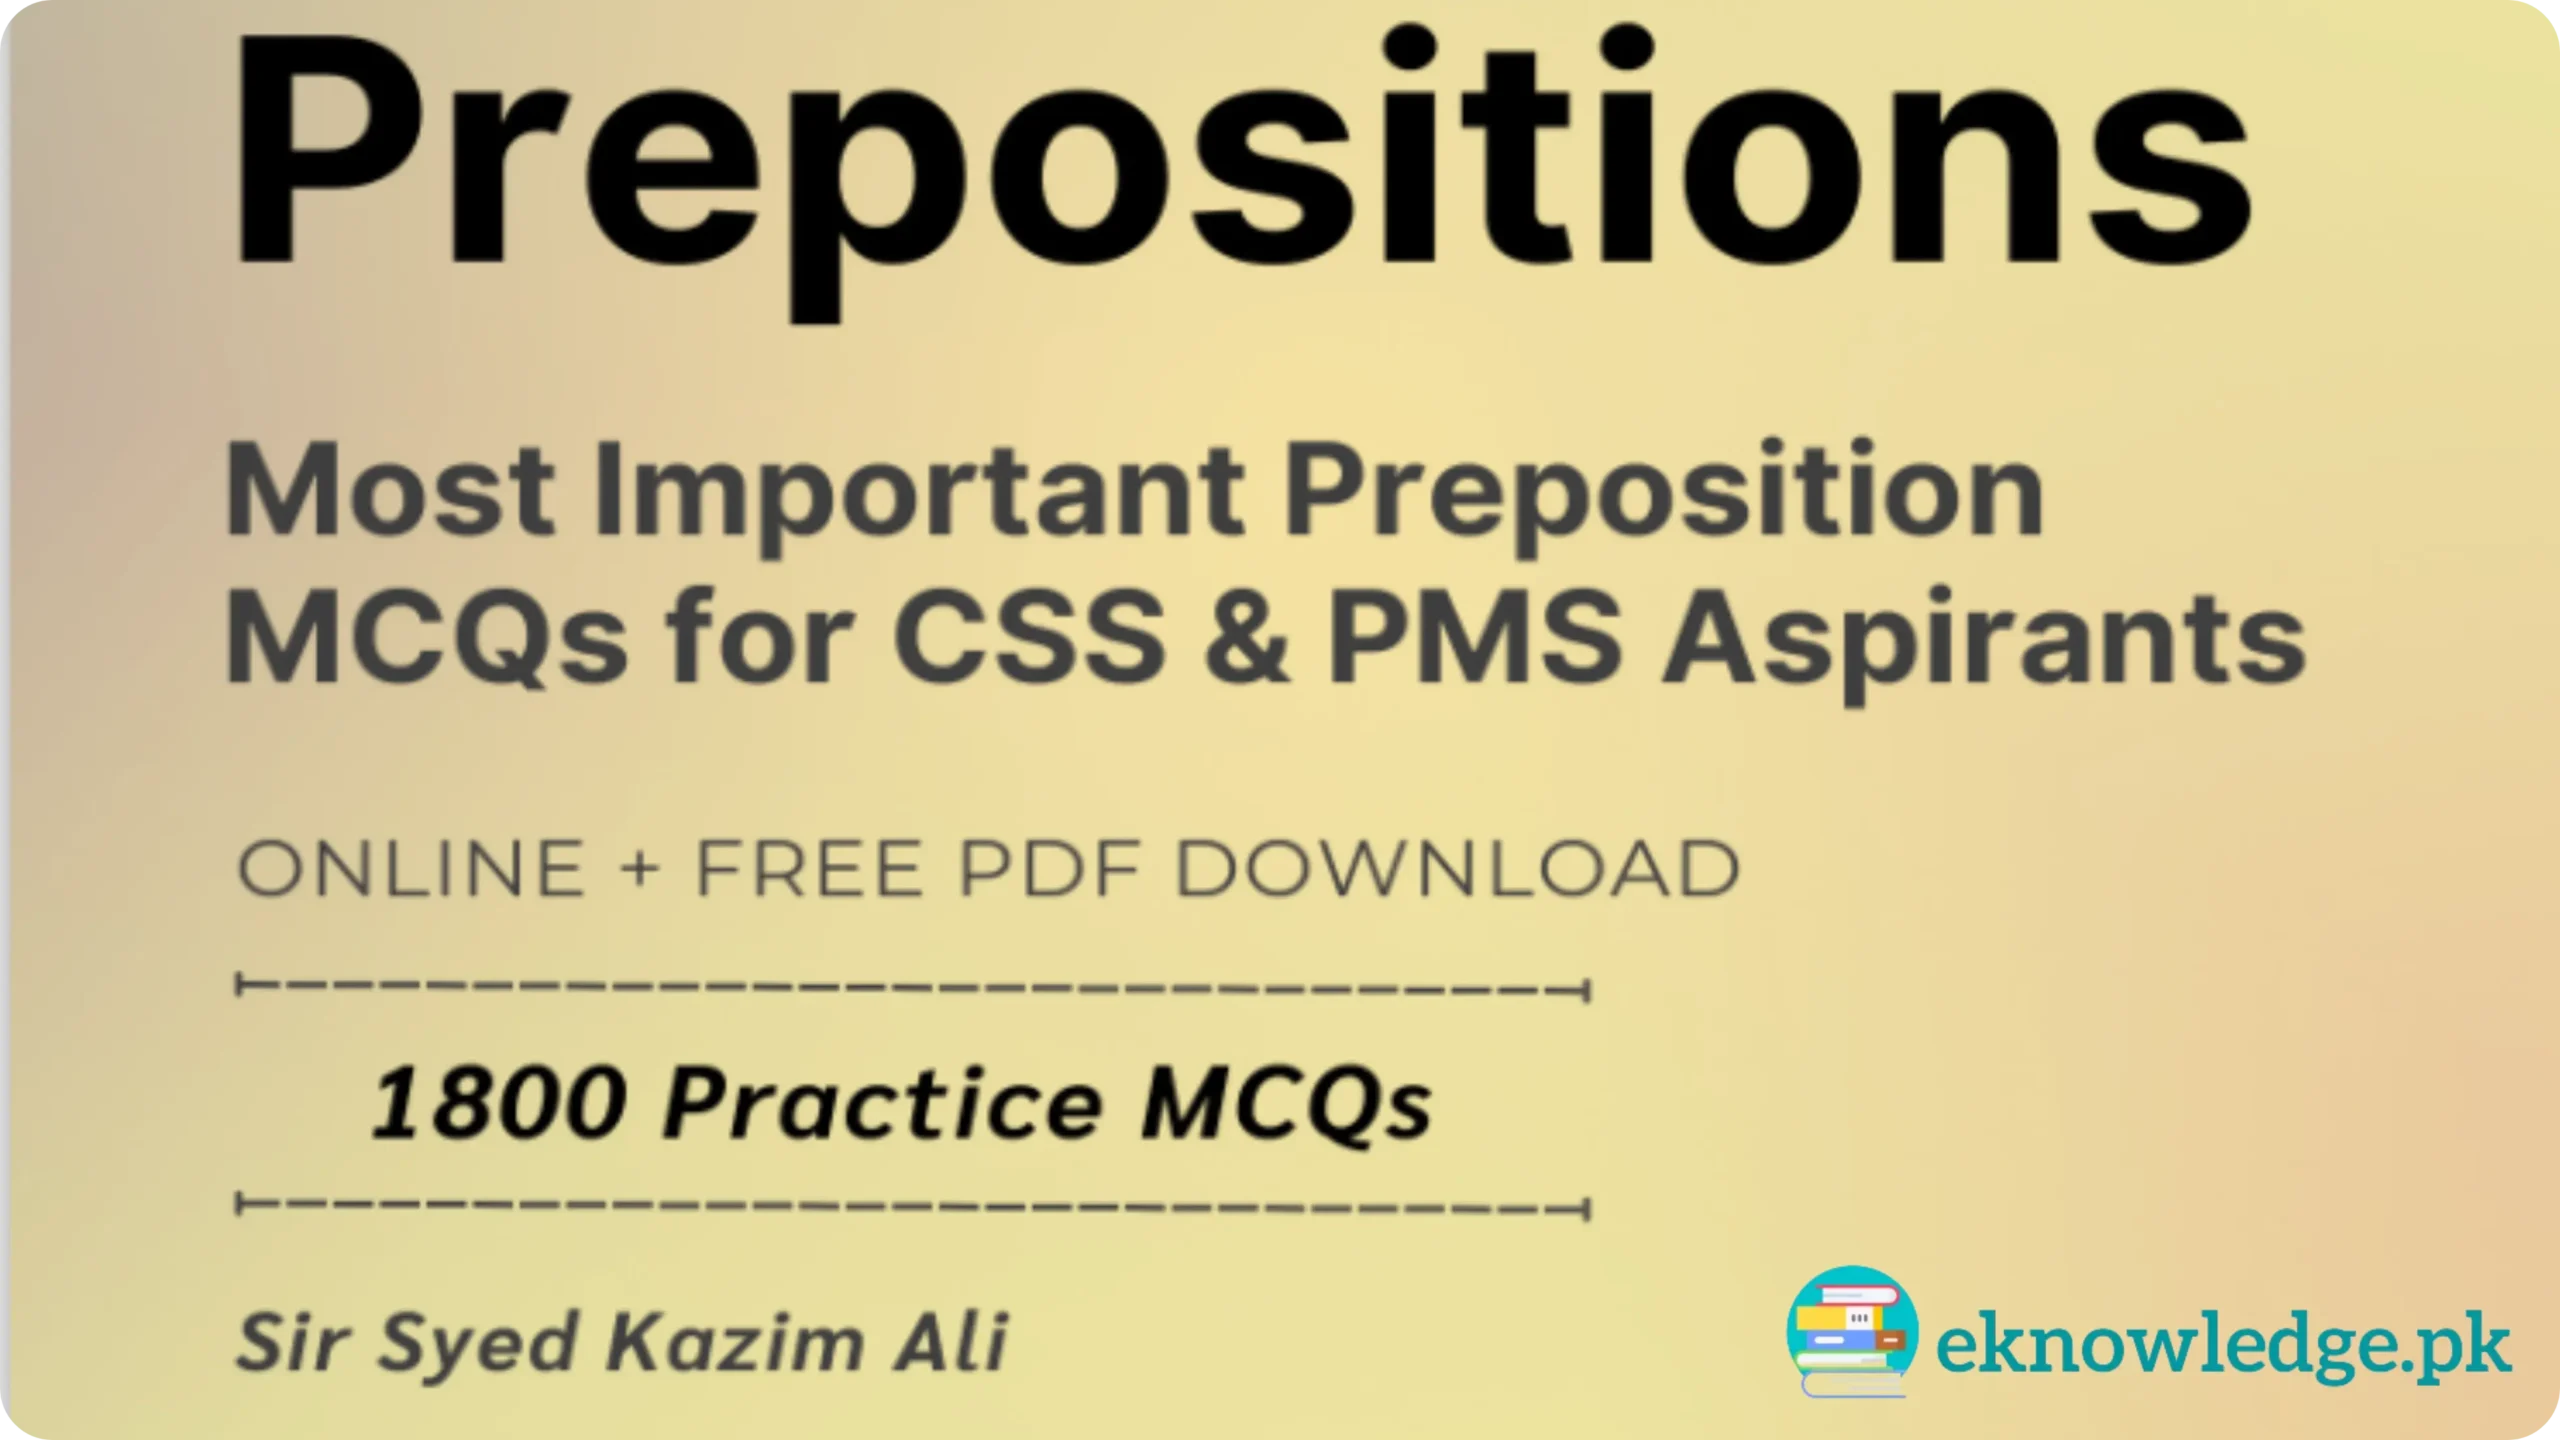 Preposition-MCQs-Notes-for-CSS-and-PMS-by-Kazim-Ali